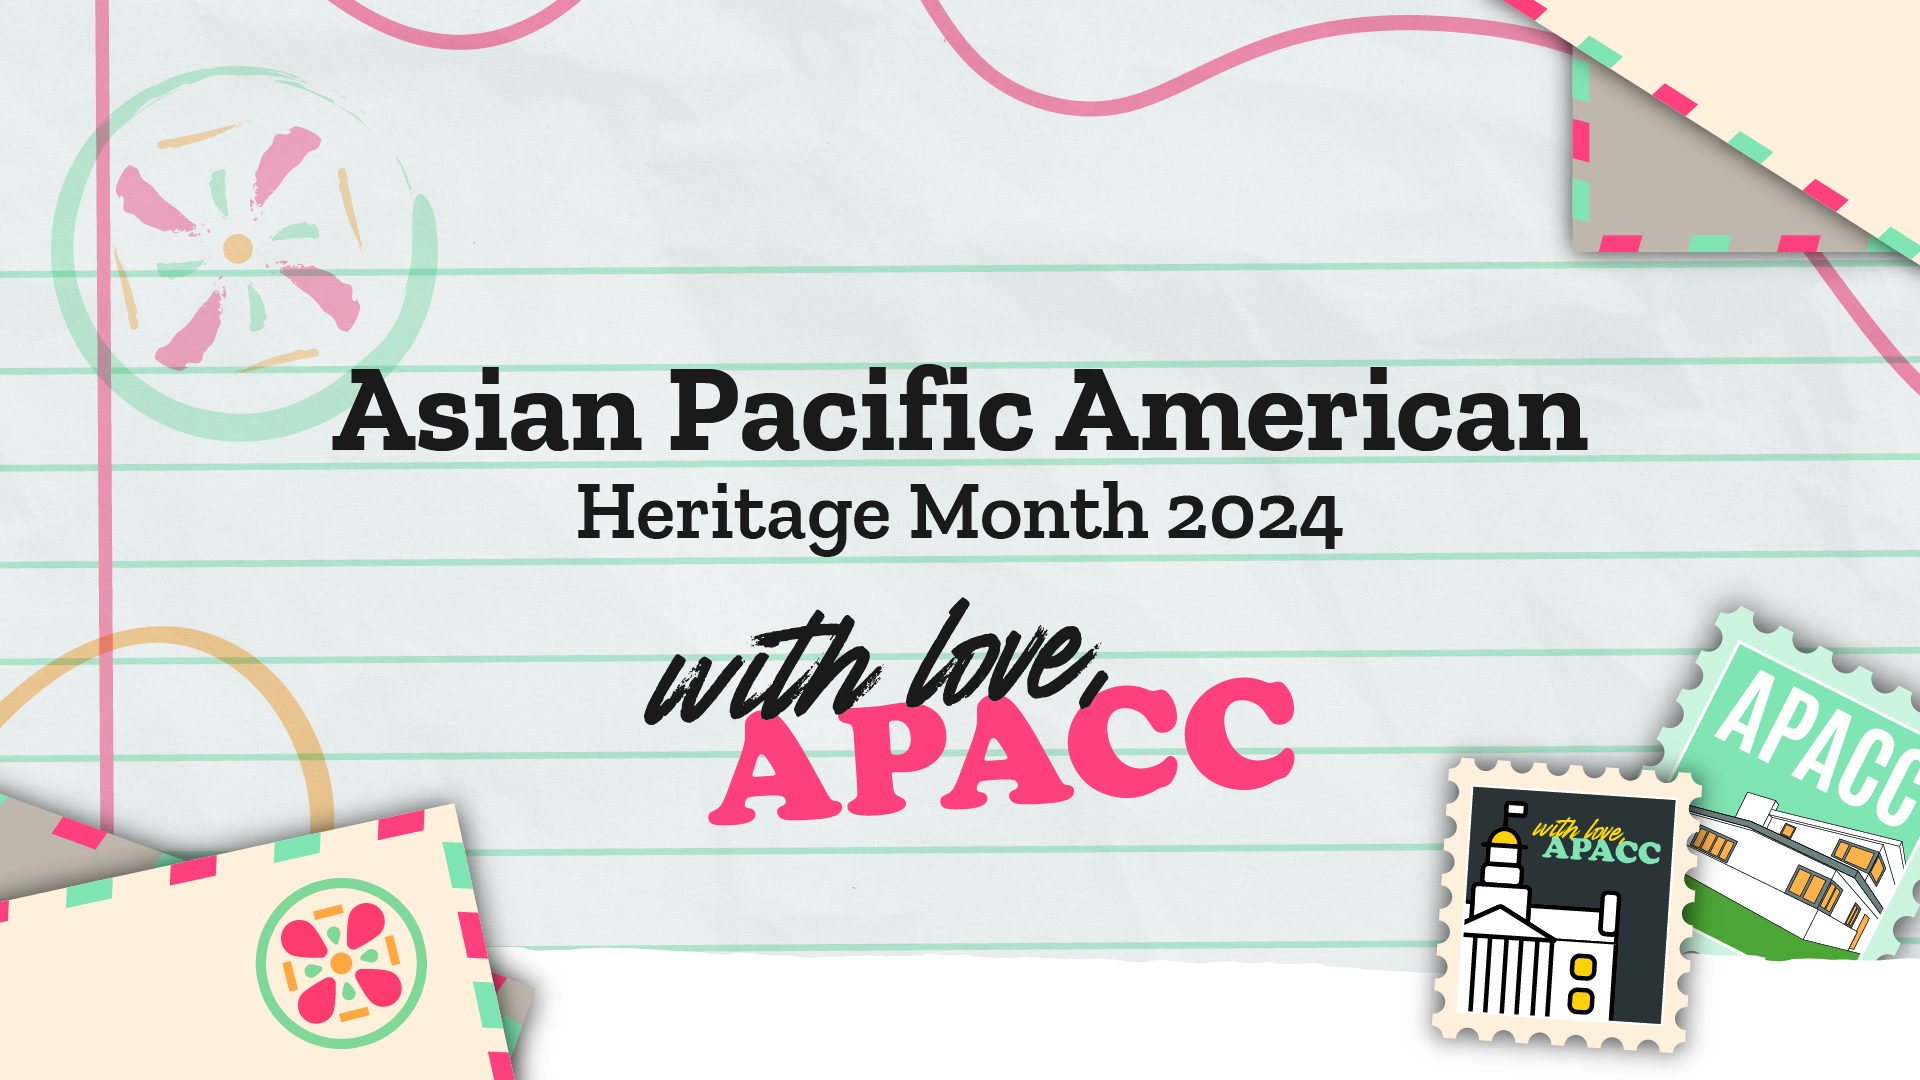 Asian Pacific American History Month's theme is: Love, APACC